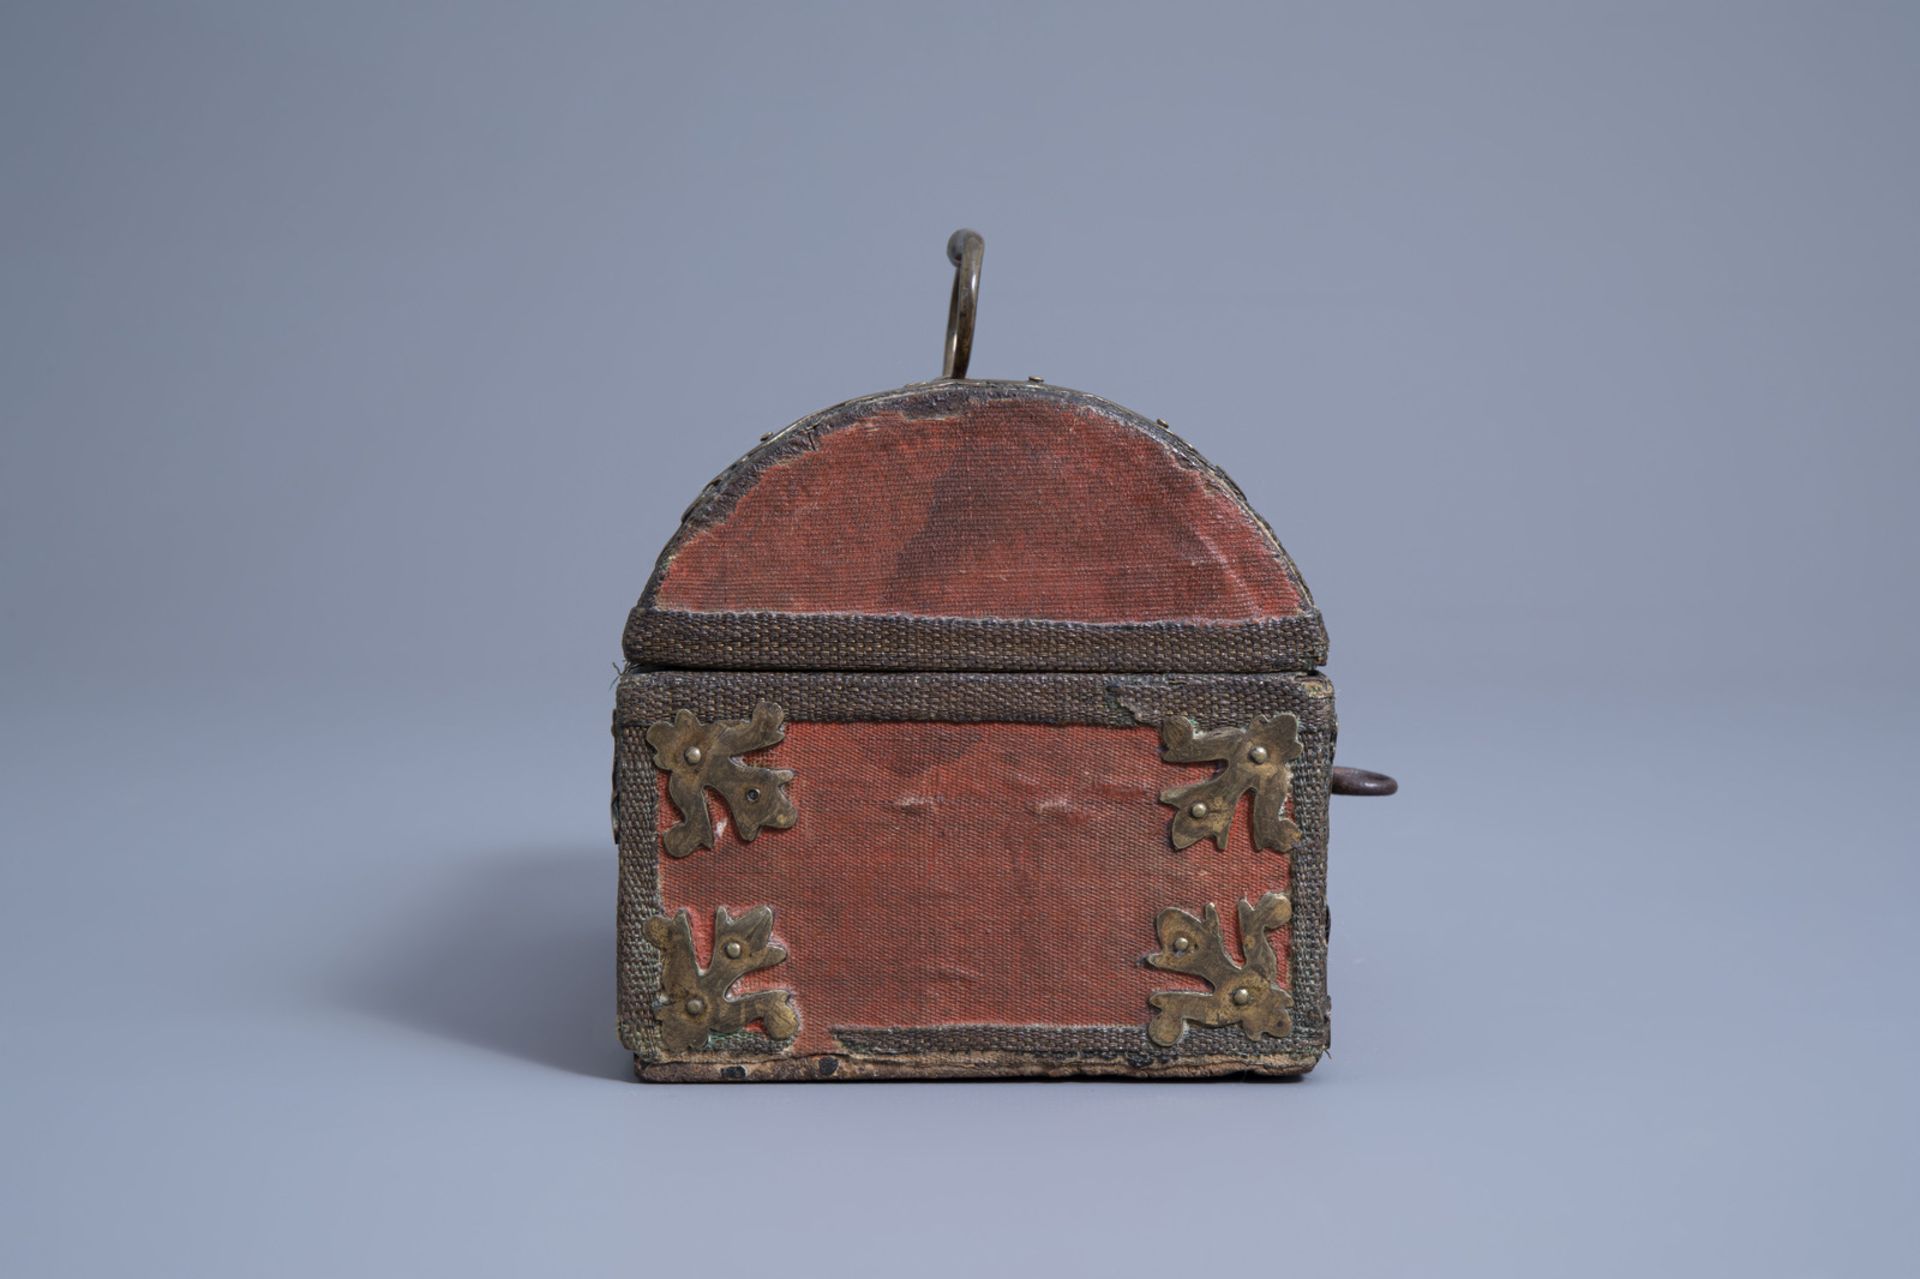 A French brass mounted and lined wooden jewelry or valuables box, 18th C. - Image 3 of 8